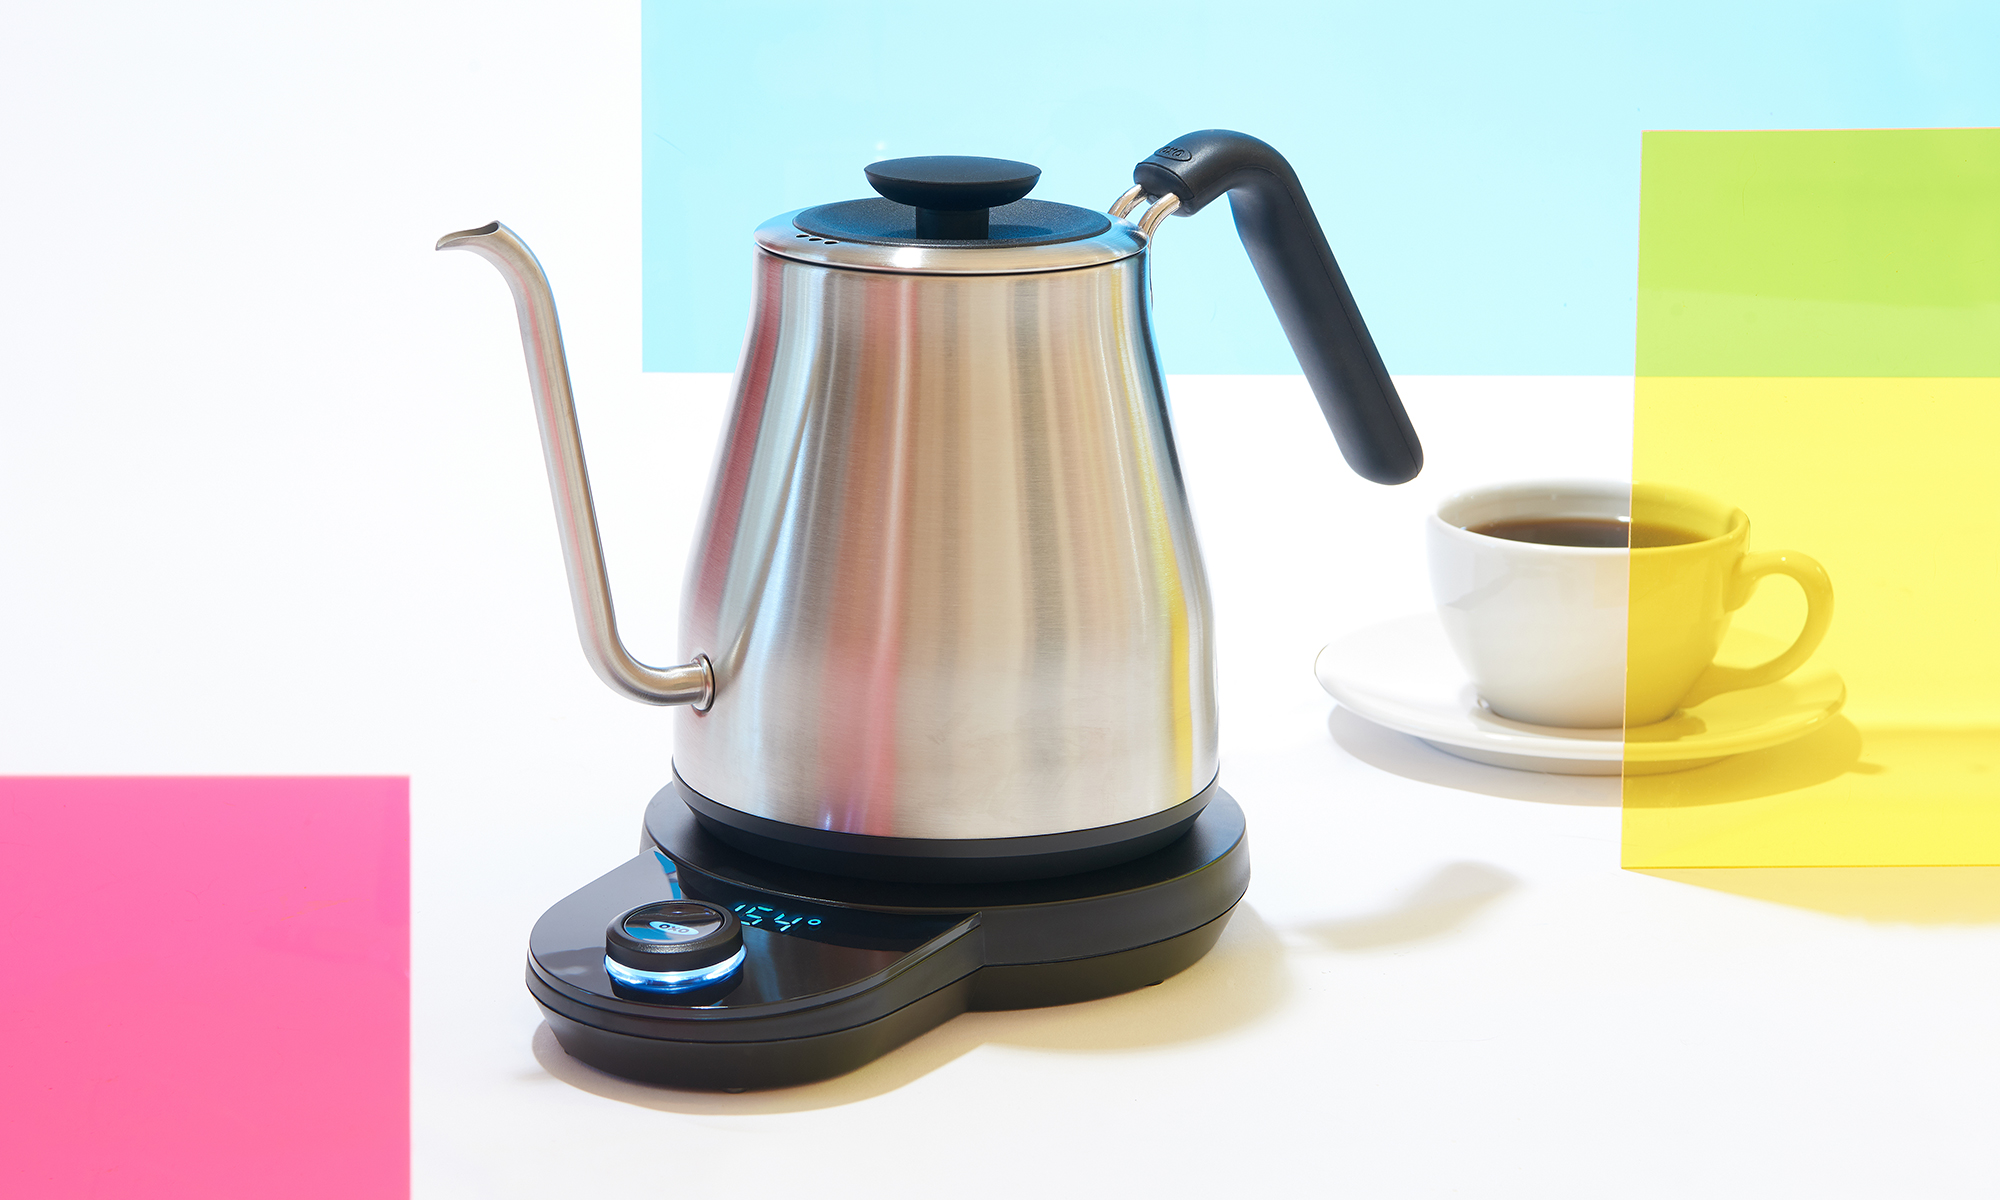 OXO Pour-over kettle for Engadget's 2021 Back to School guide.